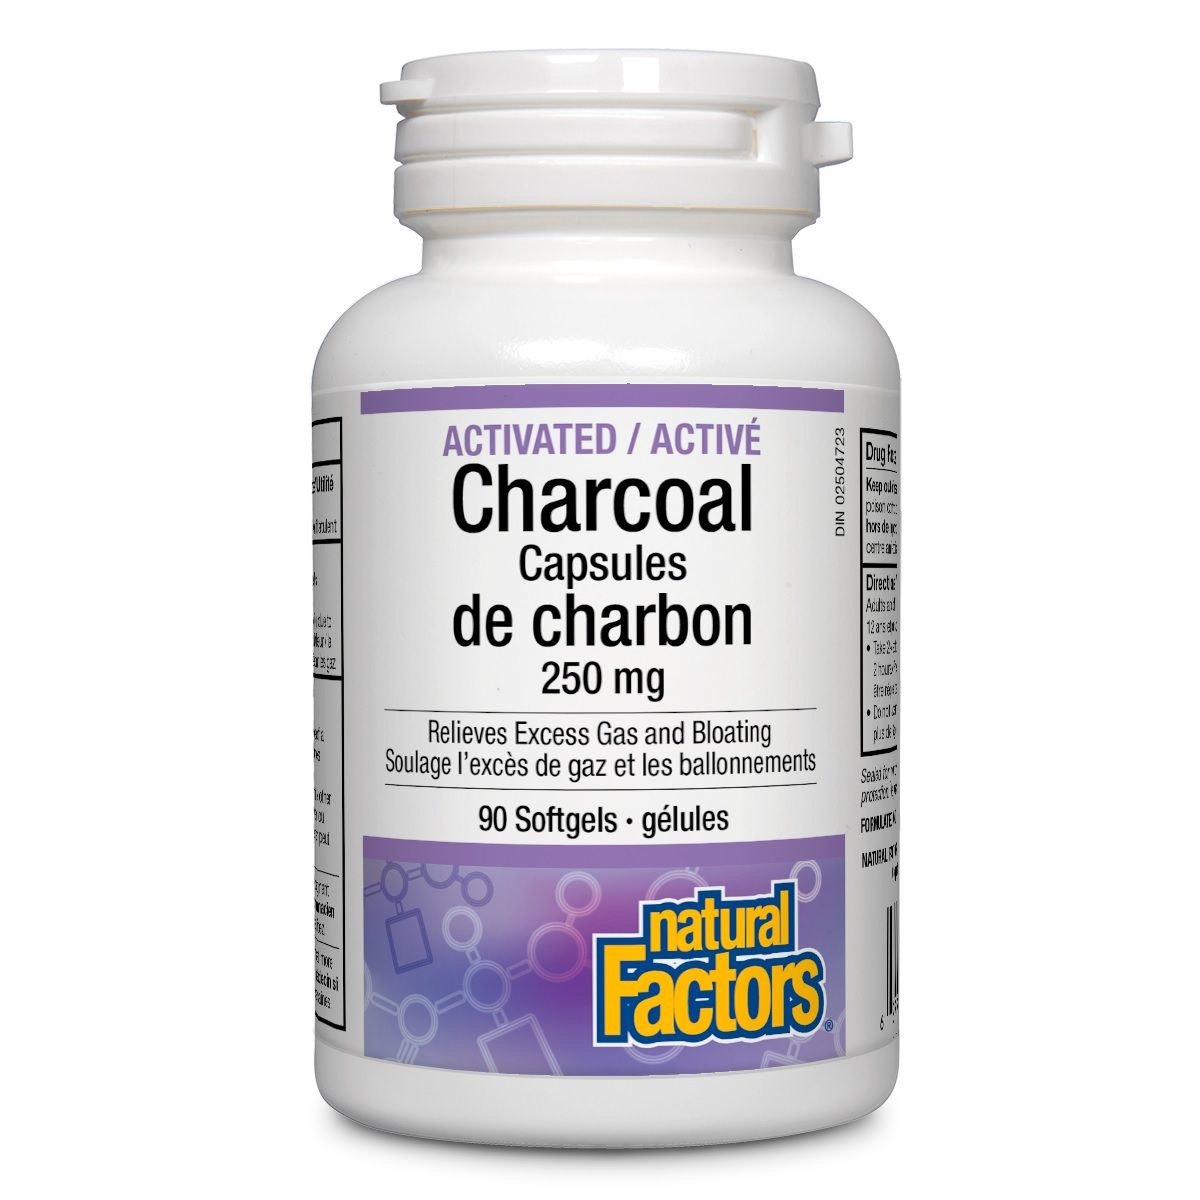 Natural Factor - Activated Charcoal - 250 mg - 90 Softgels